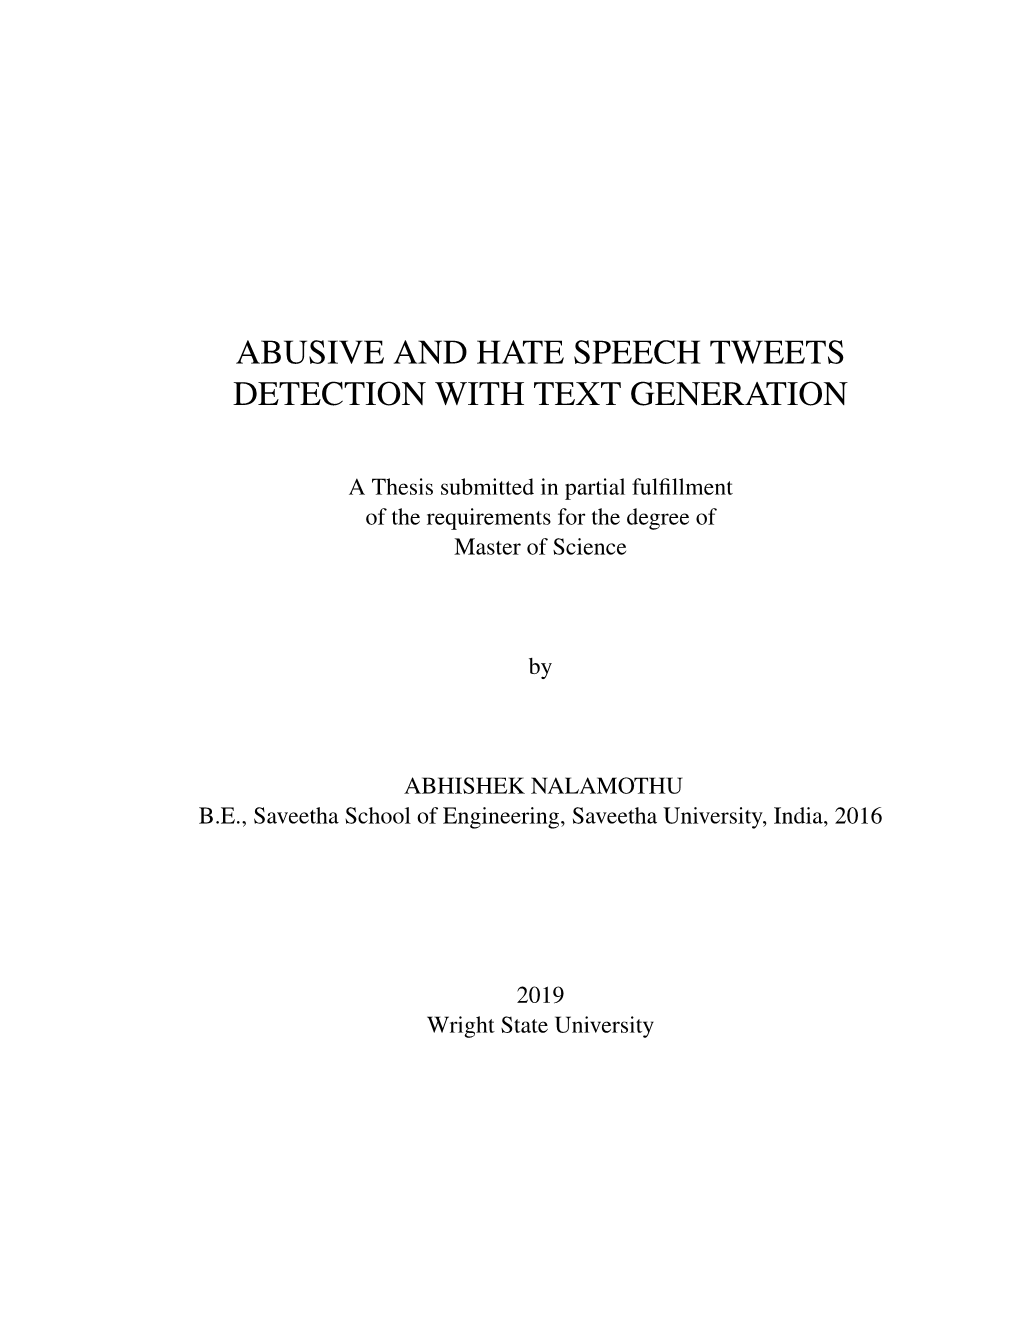 Abusive and Hate Speech Tweets Detection with Text Generation